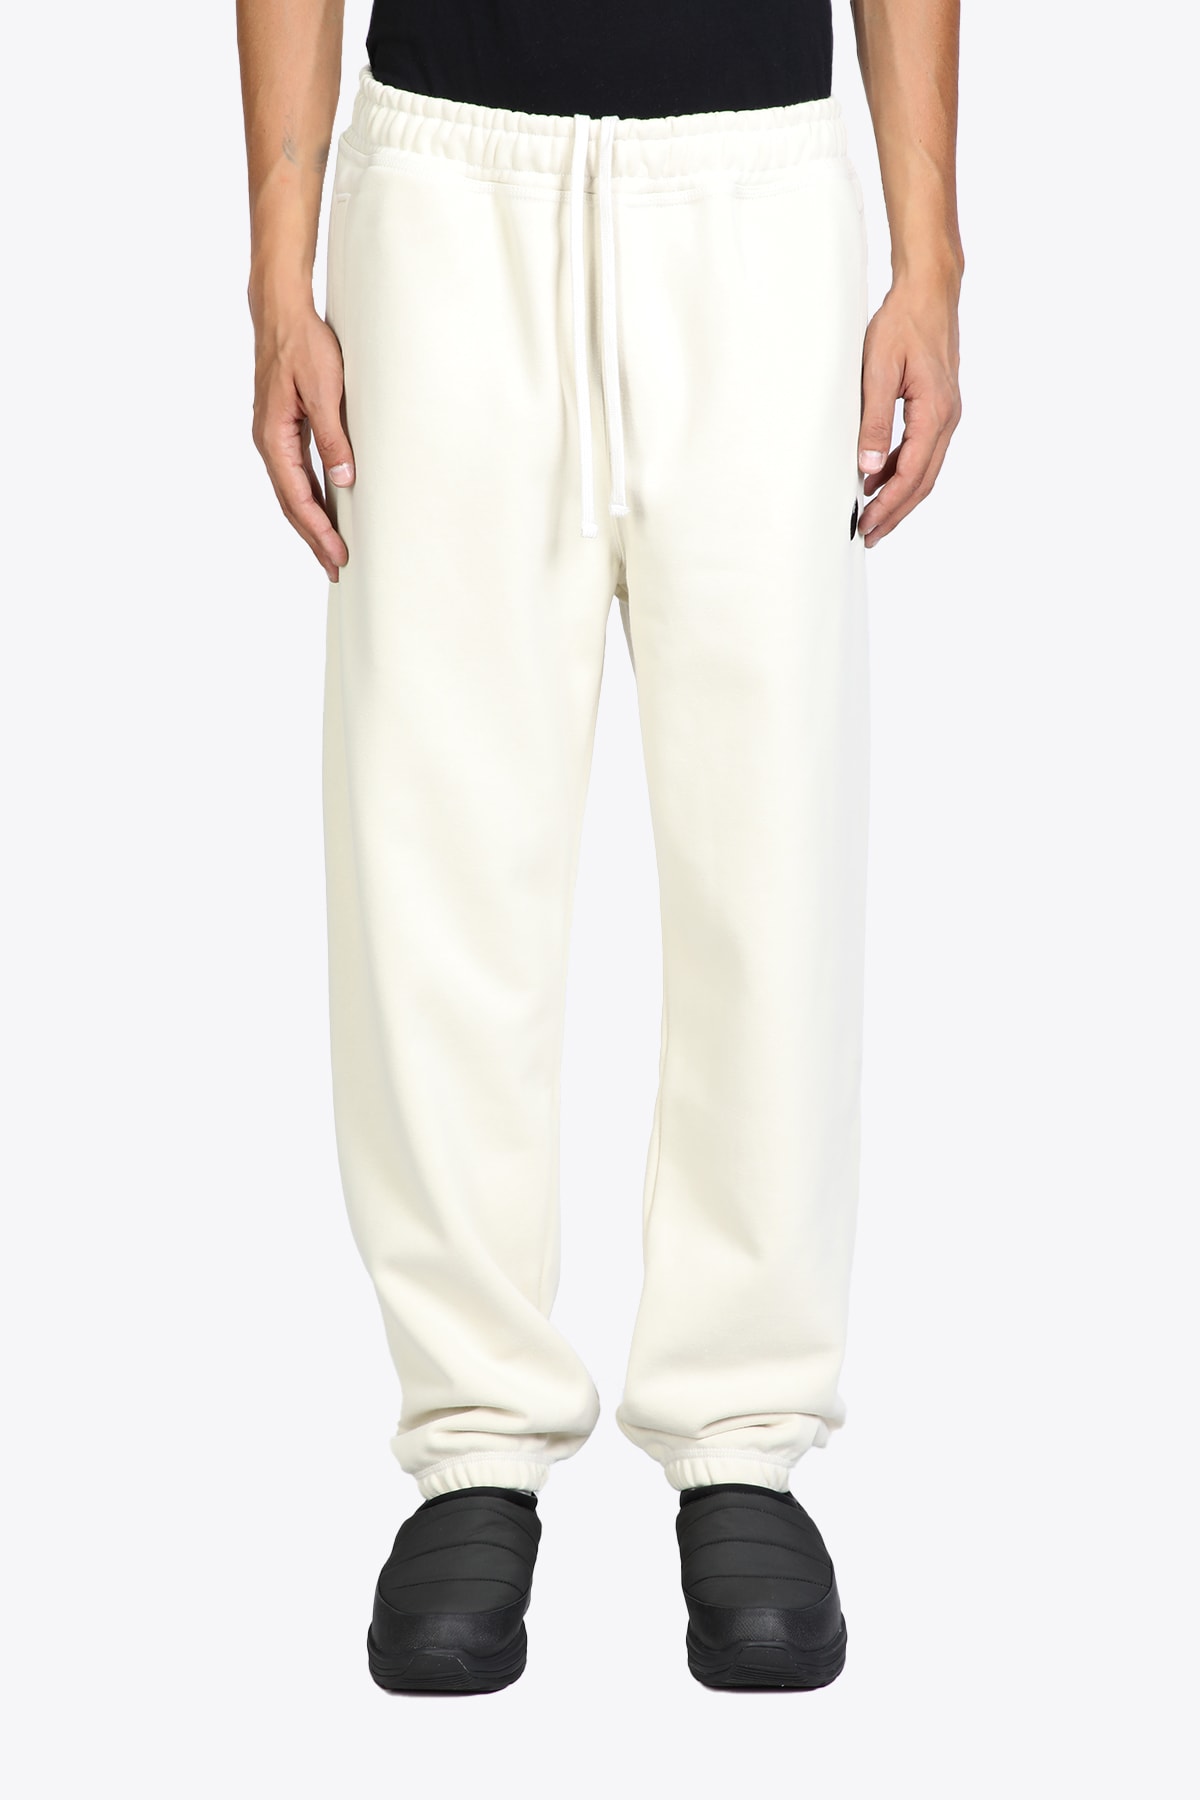 Stussy 8 Ball App. Pant Off-white cotton sweatpant with 8 ball patch - 8 ball app. pant